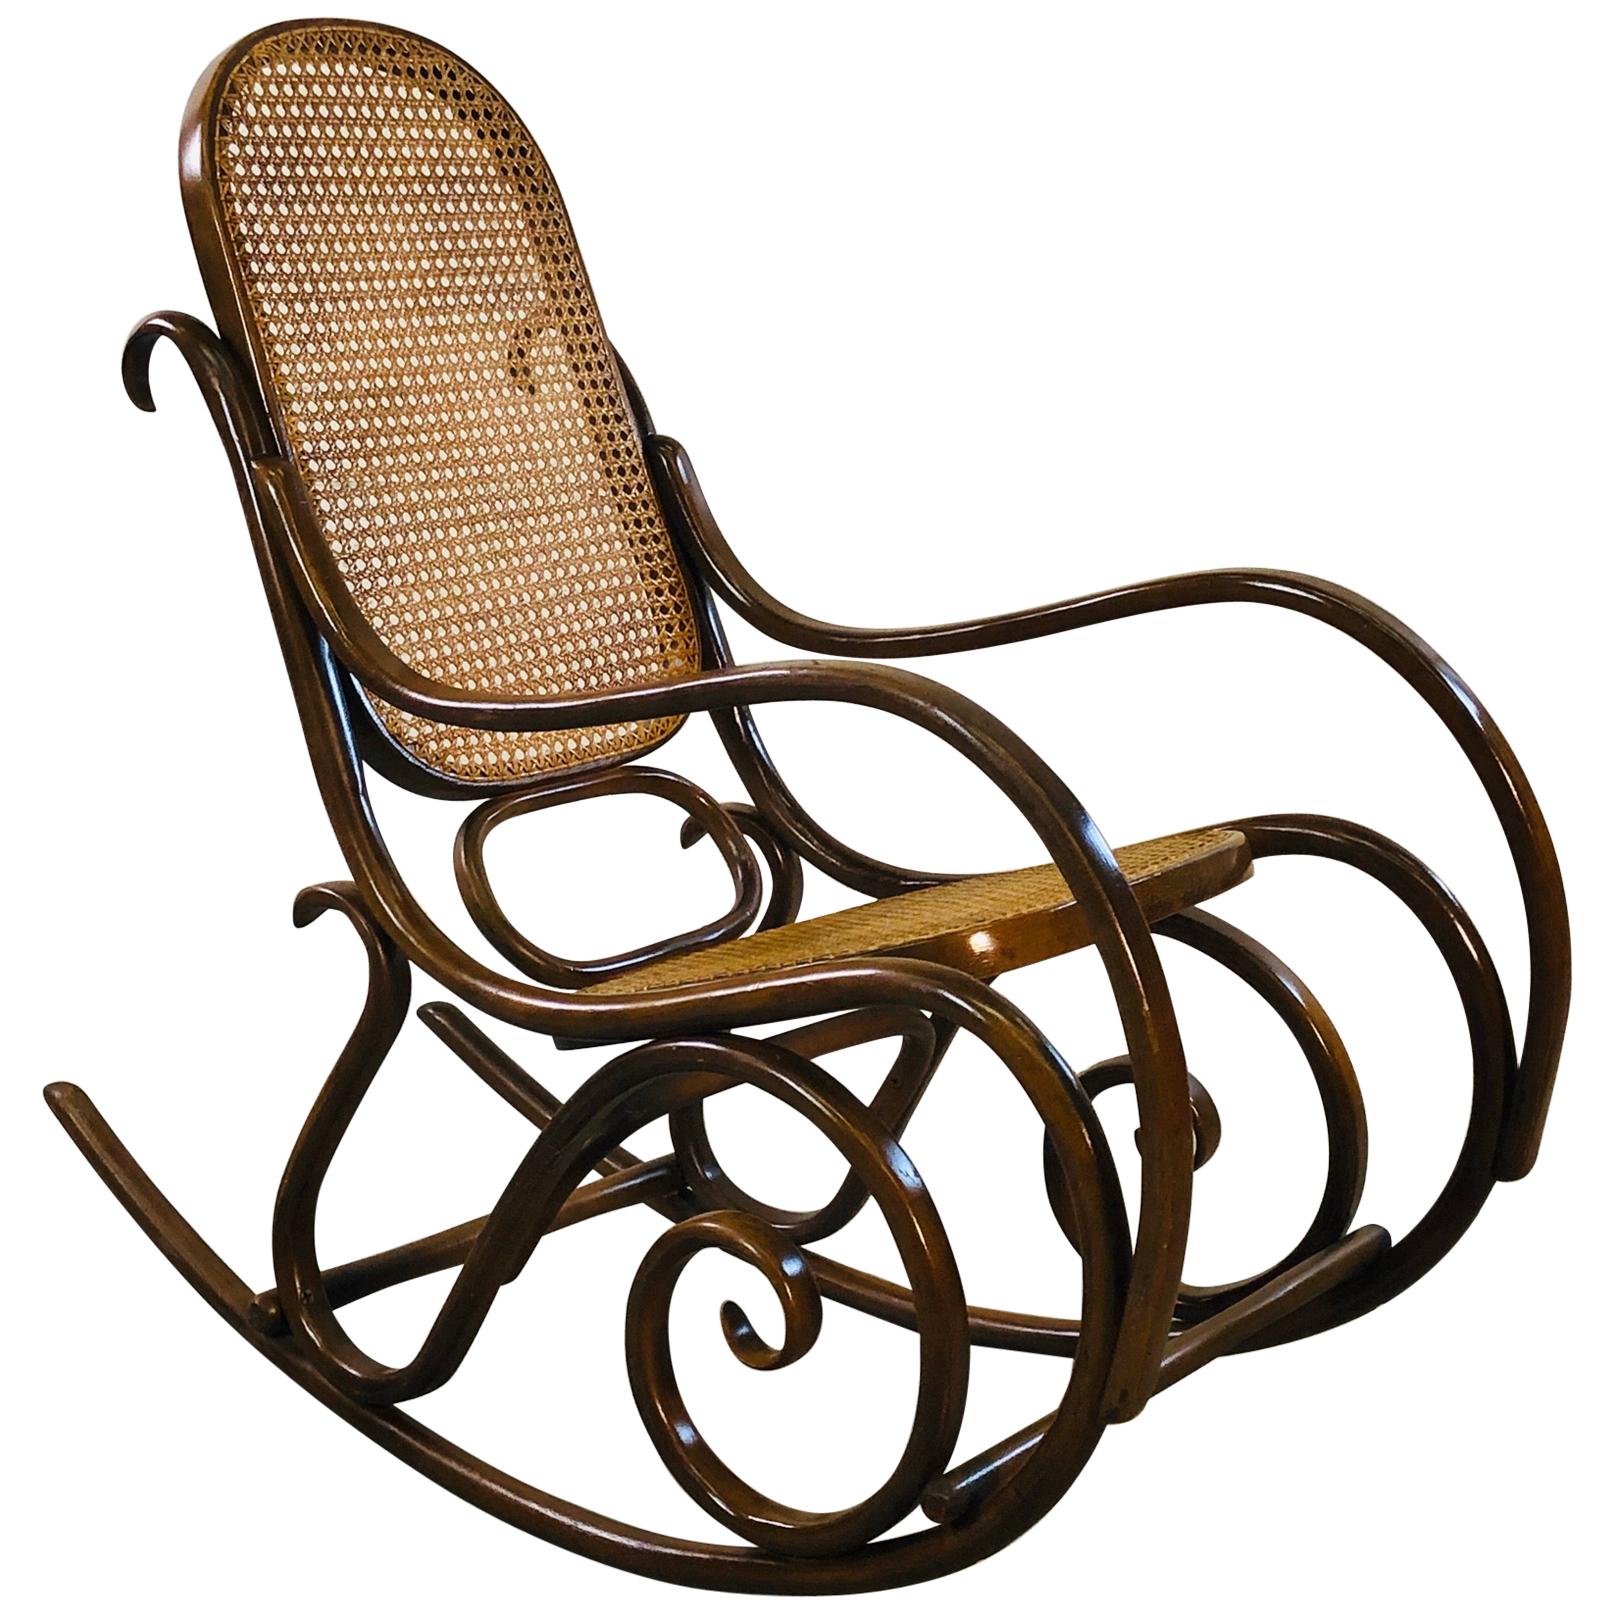 Thonet Style Beechwood and Cane Rocking Chair